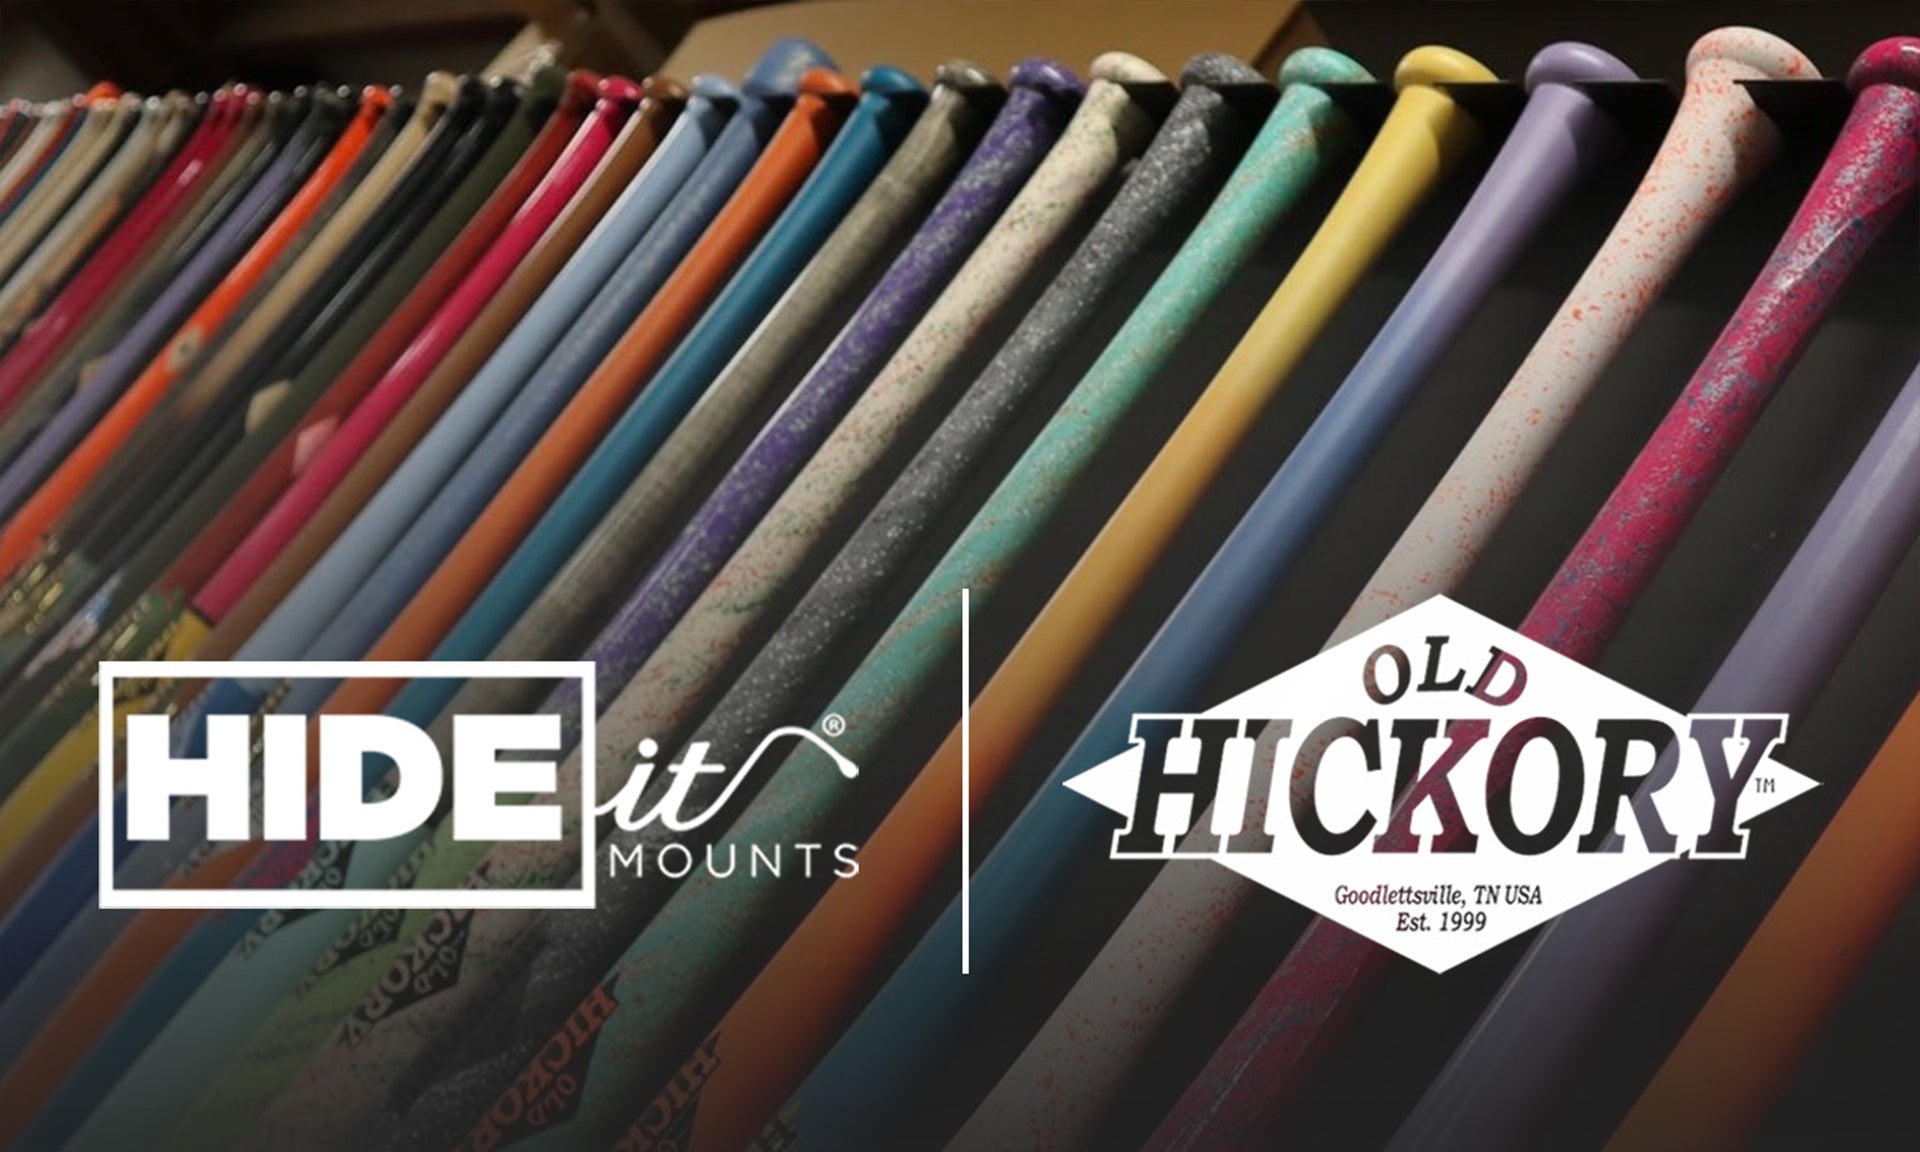 HIDEit Mounts x Old Hickory Father's Day Giveaway